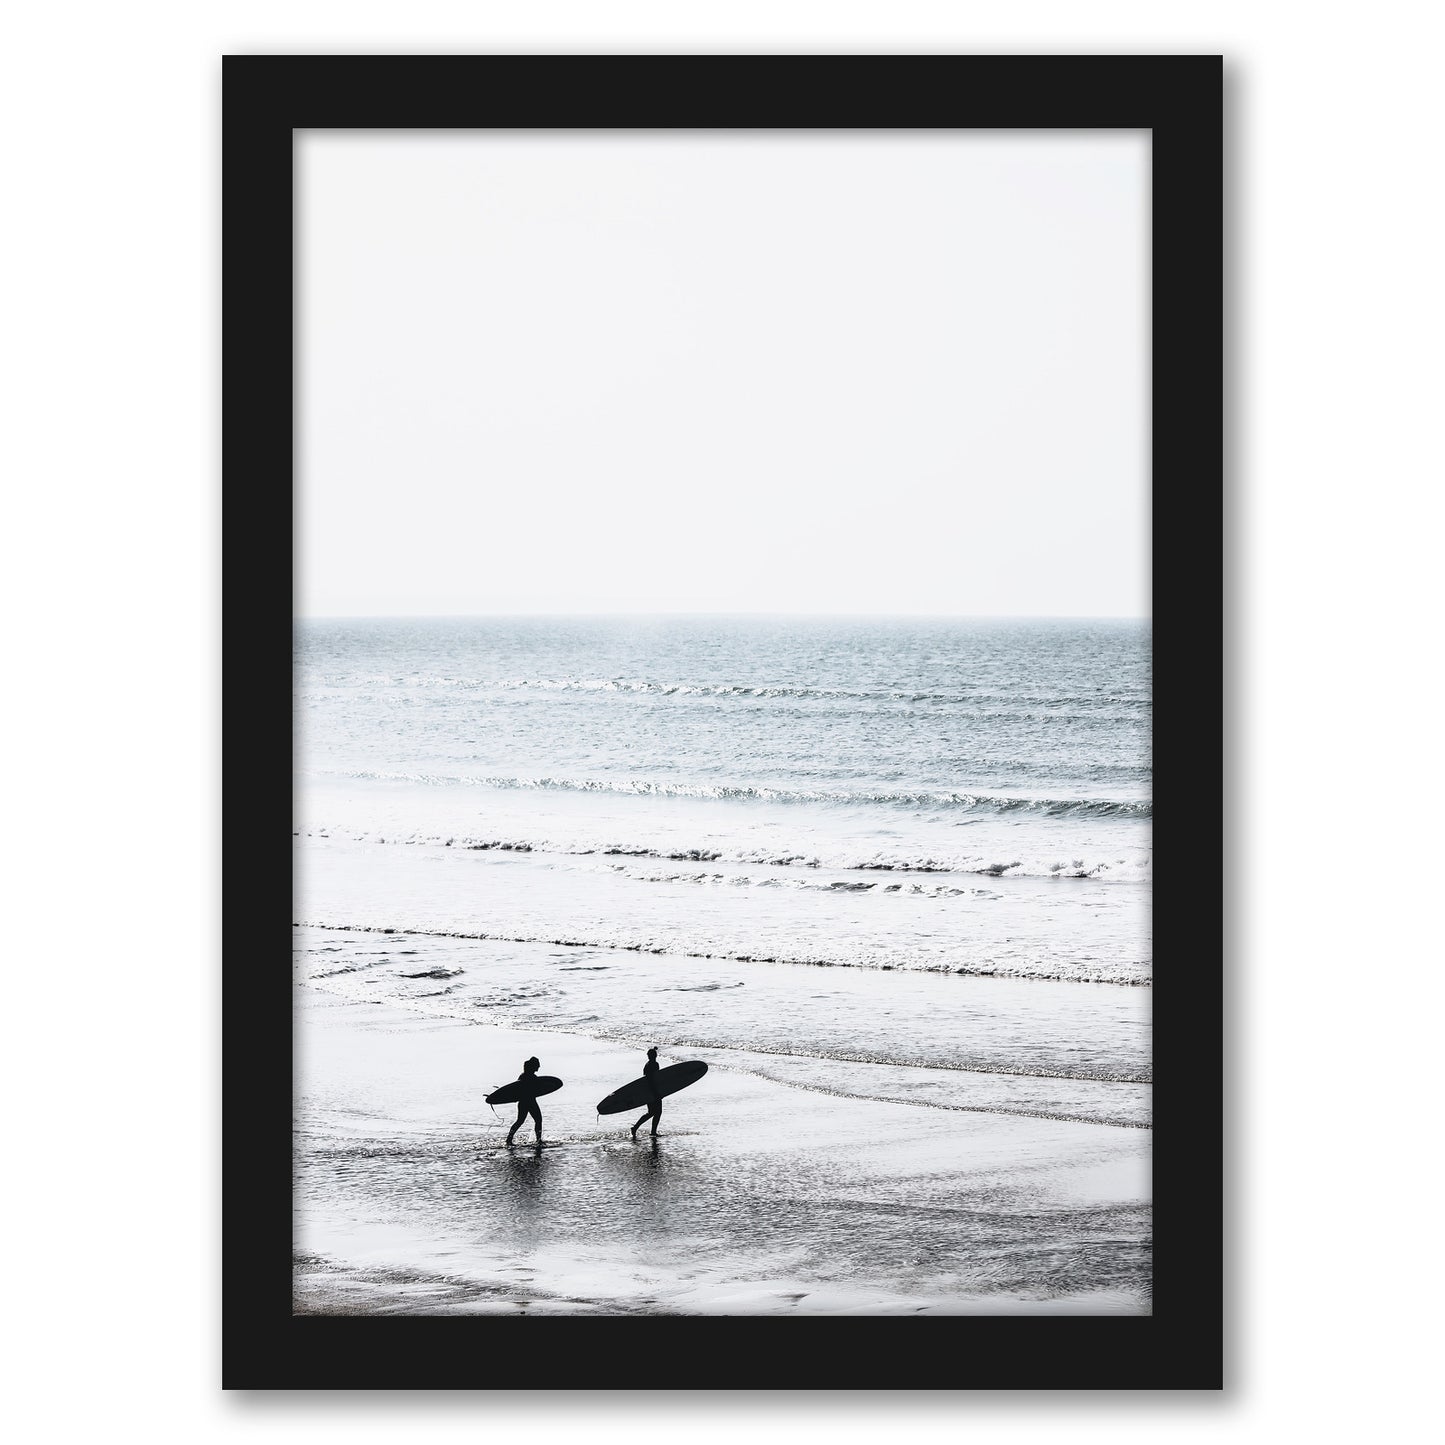 Two Surfers On The Beach by Tanya Shumkina - Black Framed Print - Wall Art - Americanflat